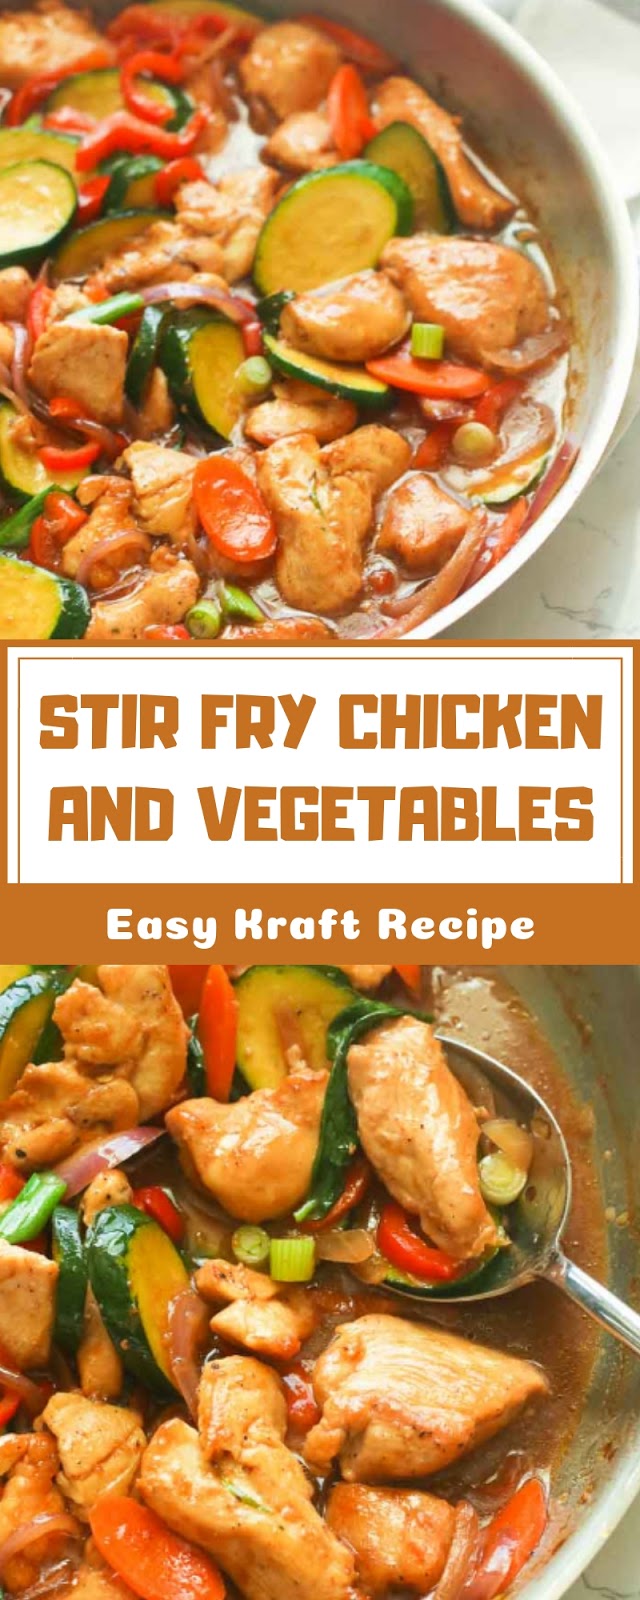 STIR FRY CHICKEN AND VEGETABLES